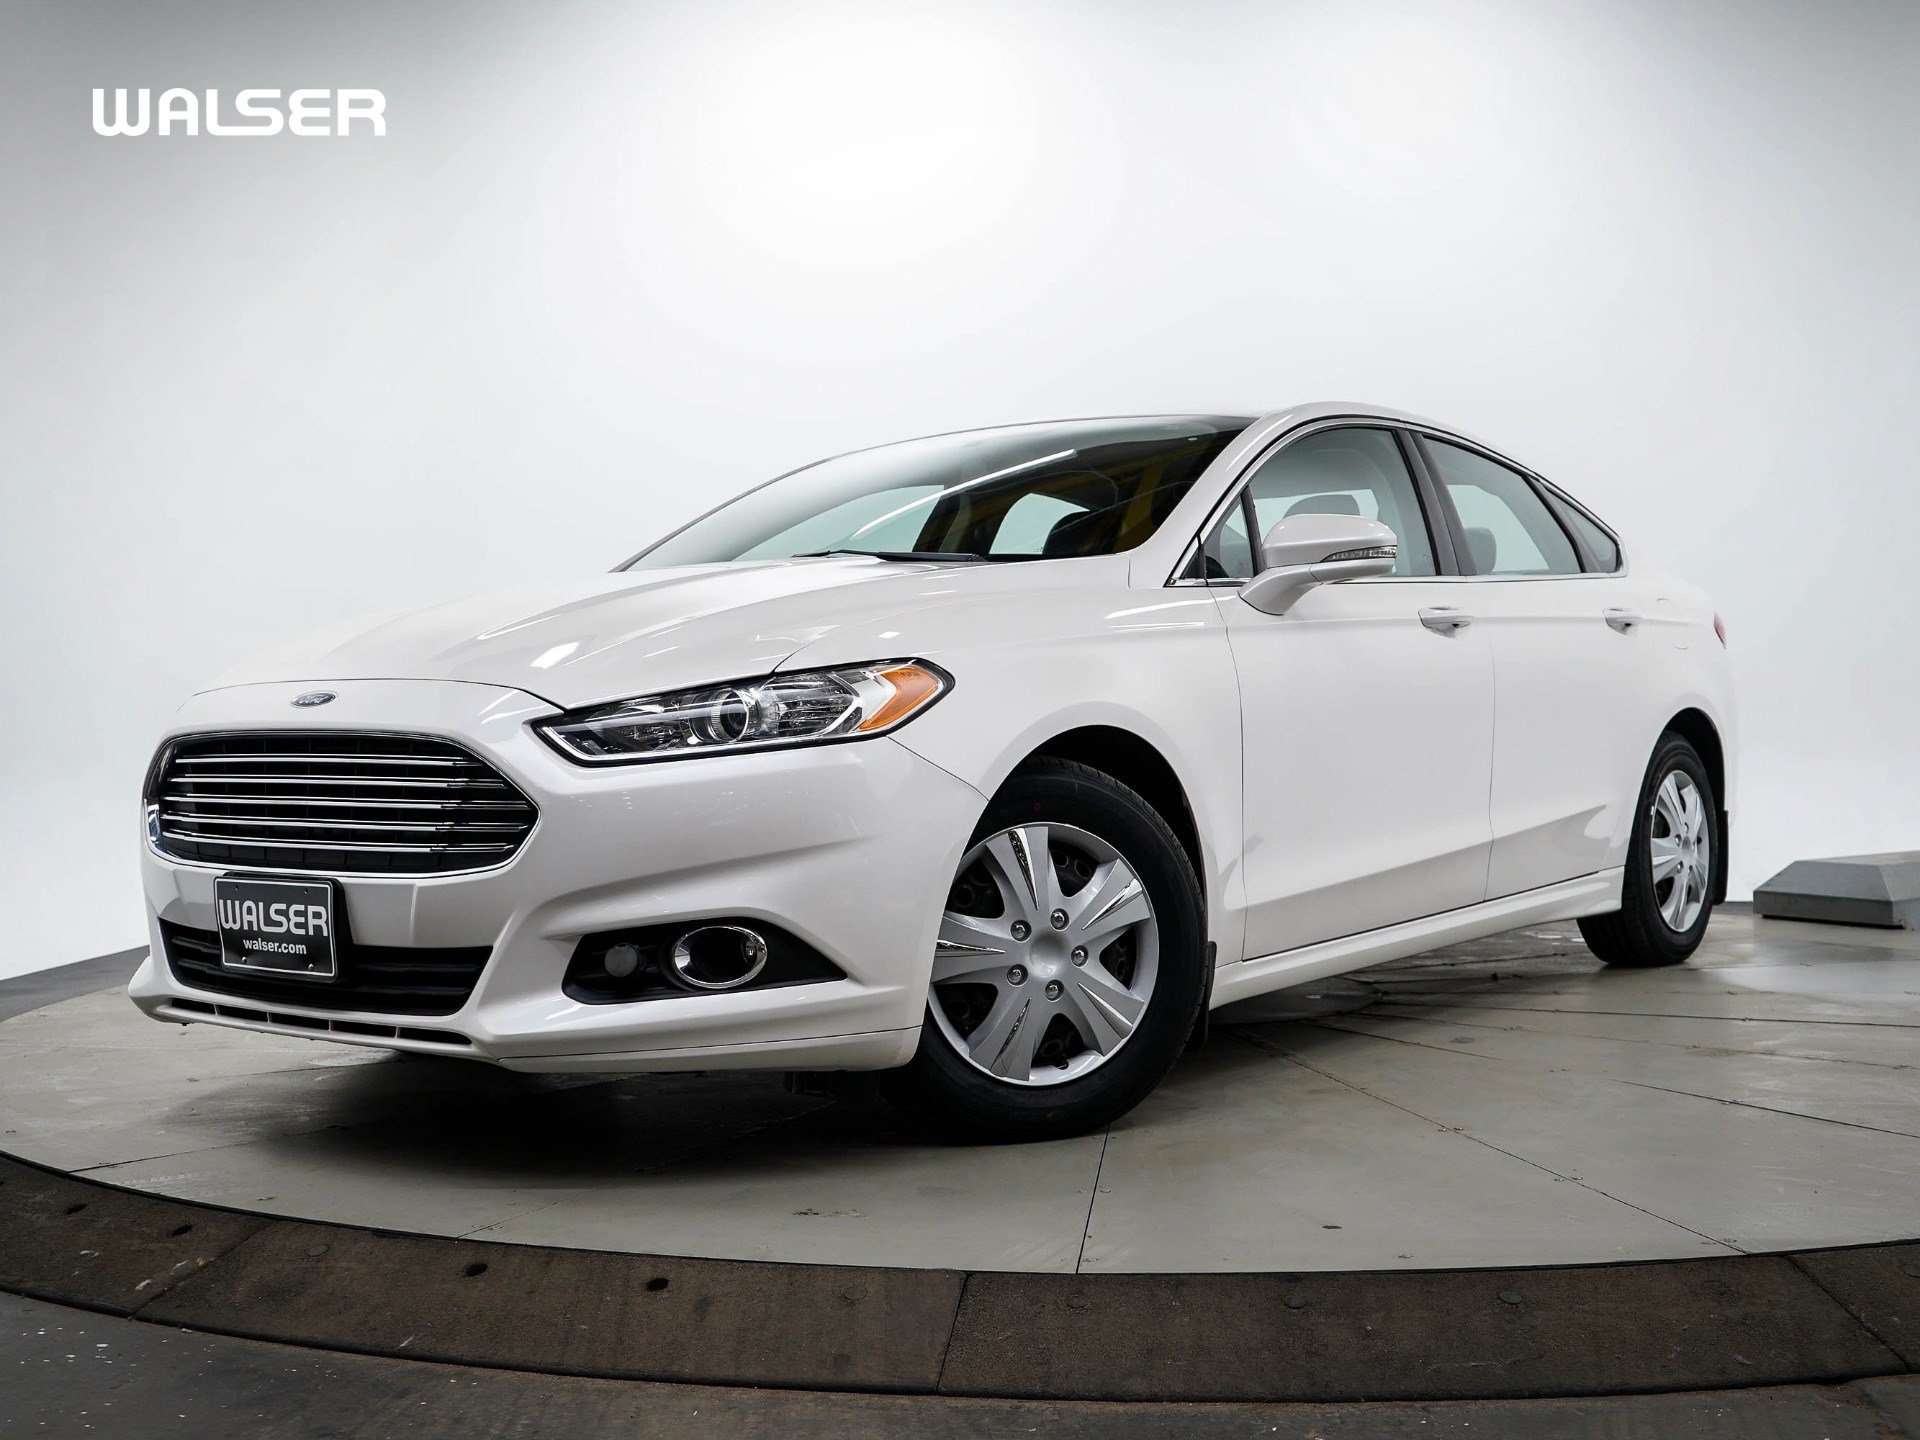 Pre-Owned 2015 Ford Fusion Se Sedan in Burnsville #14CC069P | Walser  Automotive Group